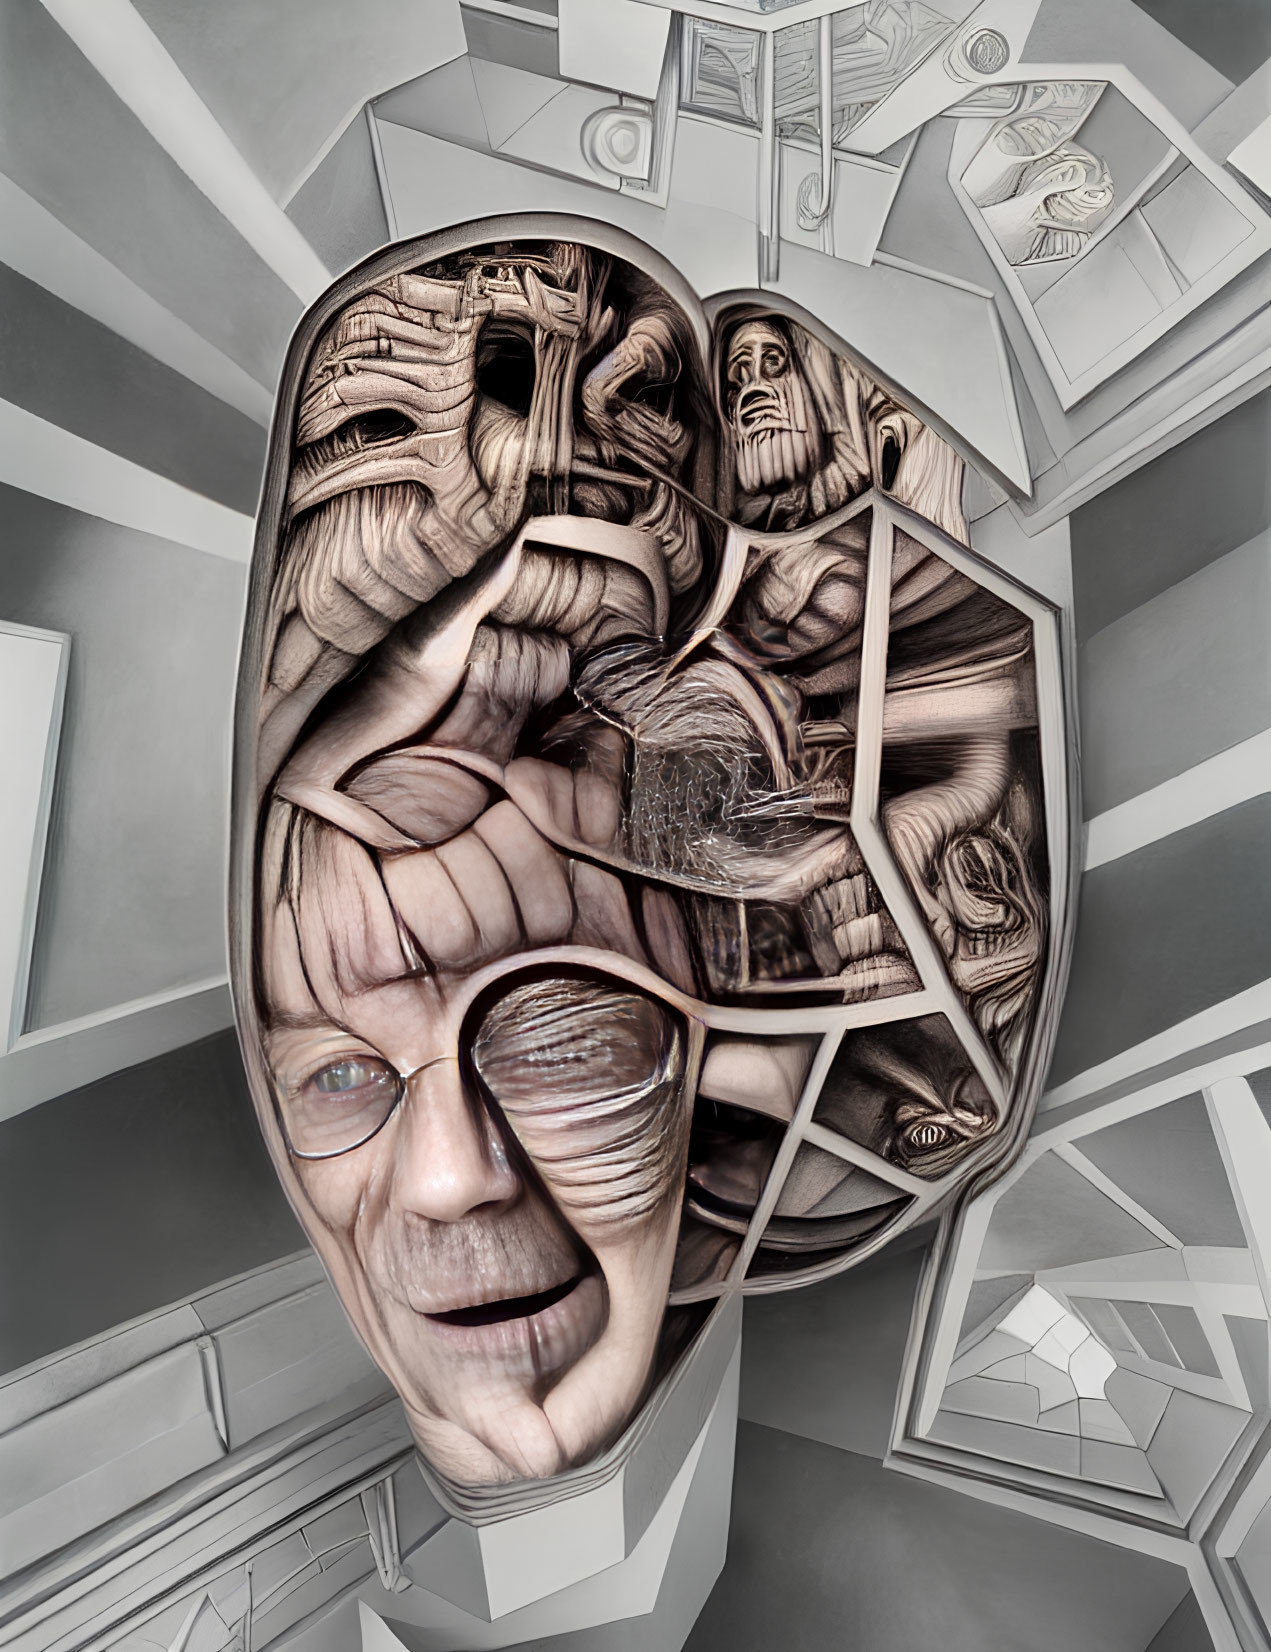 Surreal illustration of fragmented human face against abstract backdrop